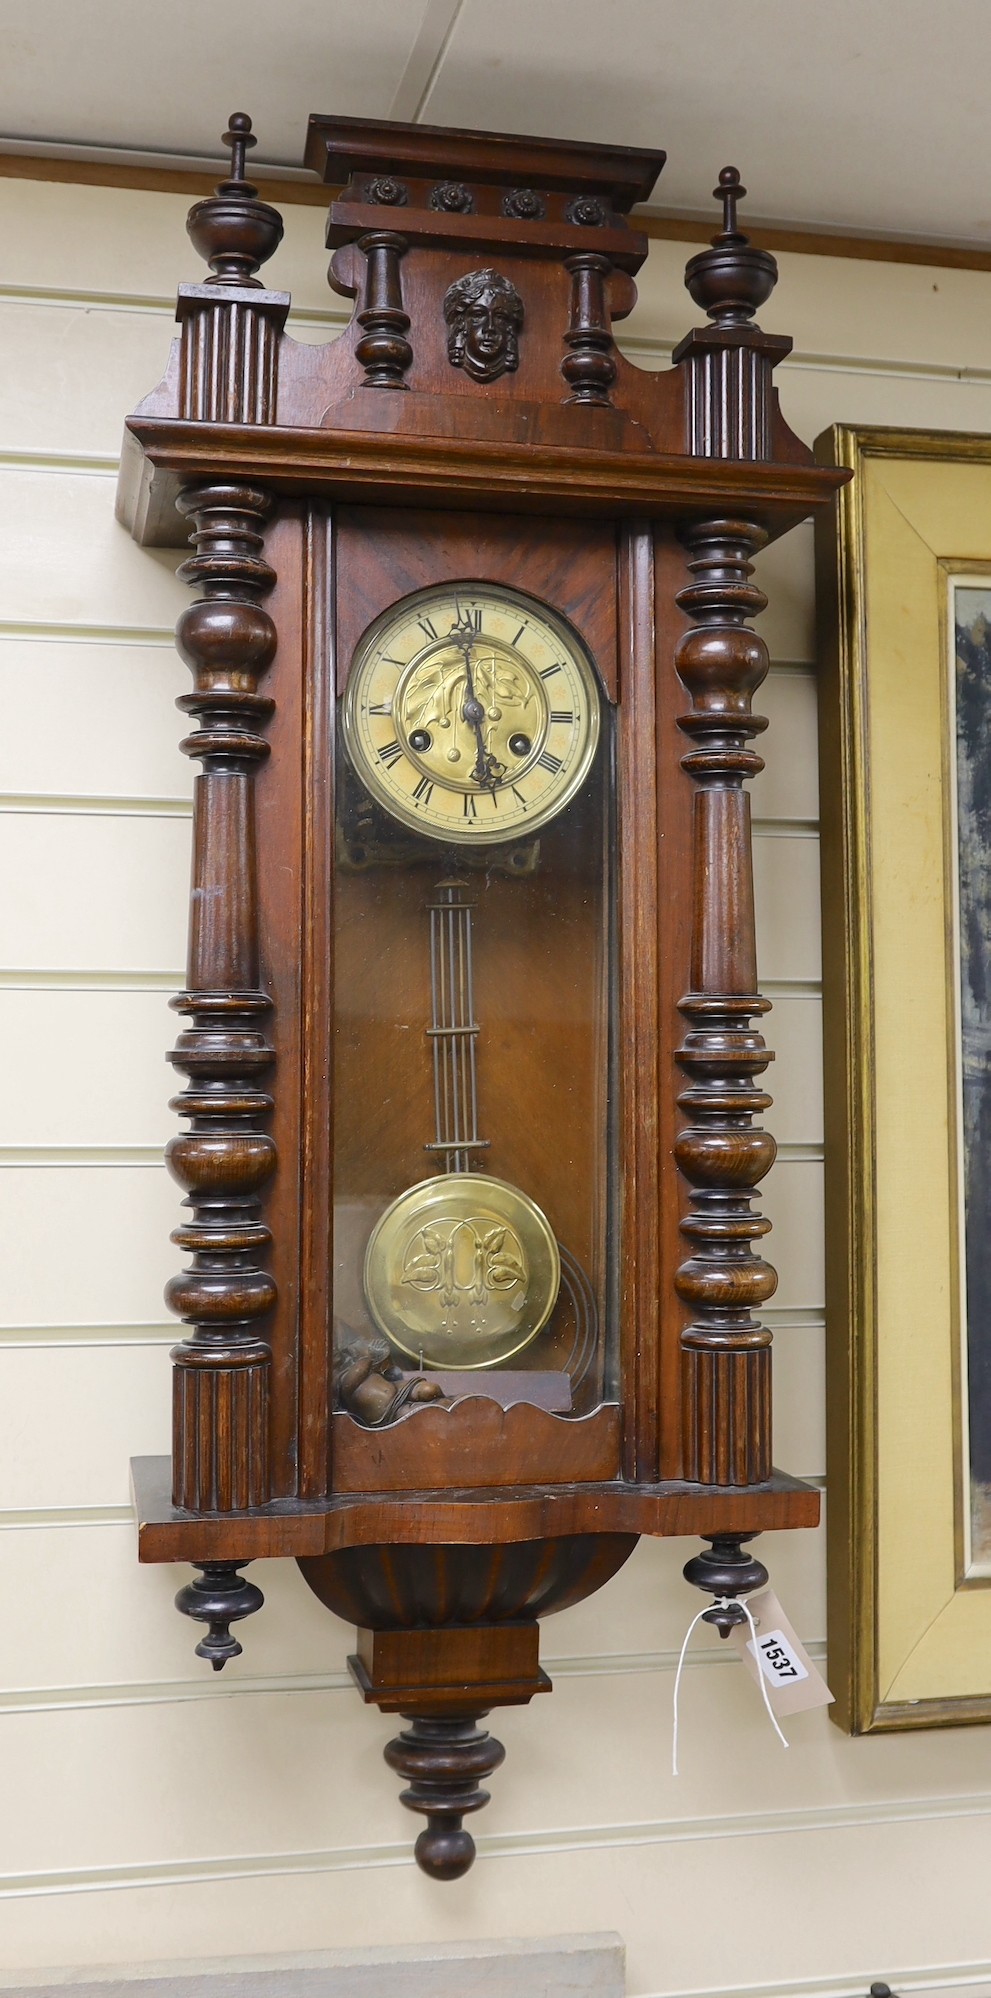 A 19th century German architectural beech and walnut wall clock, 100 cms high